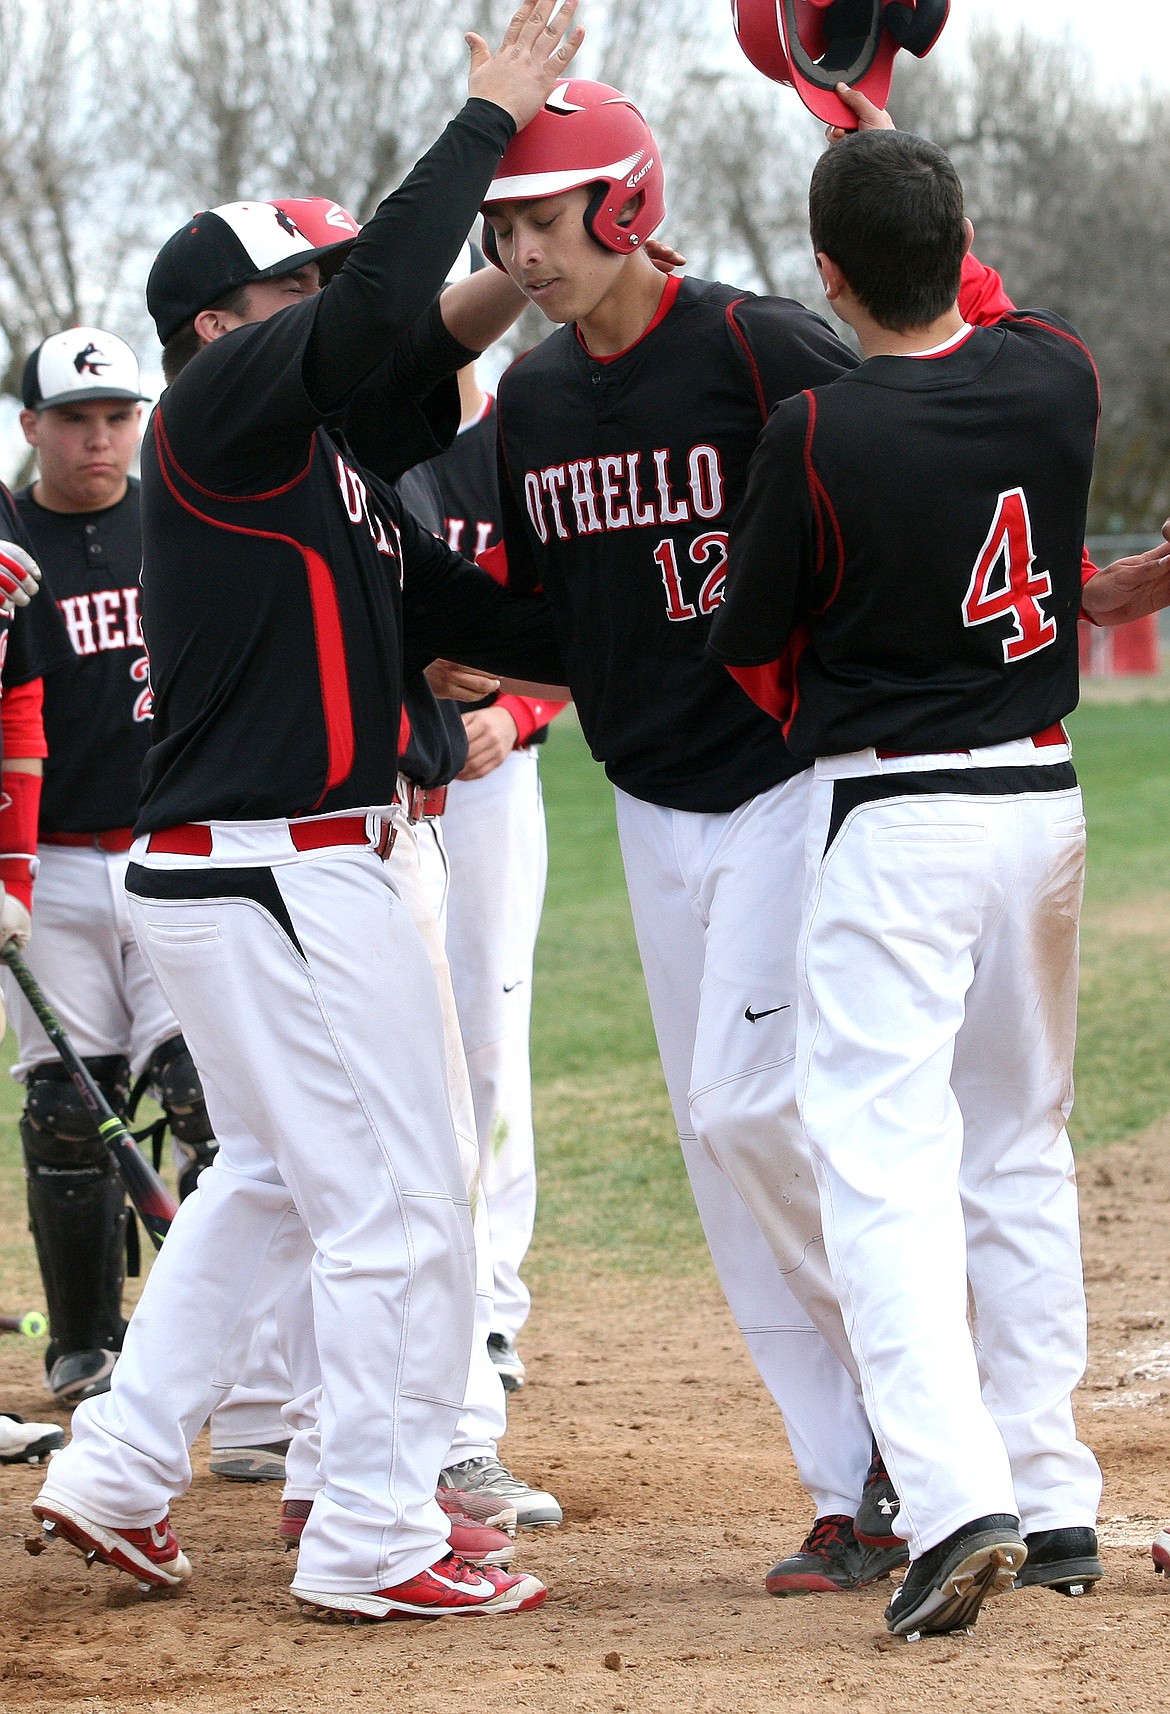 Rodney Harwood/Columbia Basin HeraldArcenio Martinez (12) of Othello is congradulated by teammates after hitting a three-run home run in the bottom of the seventh inning Saturday in the first game of a doubleheader with Ellensburg.